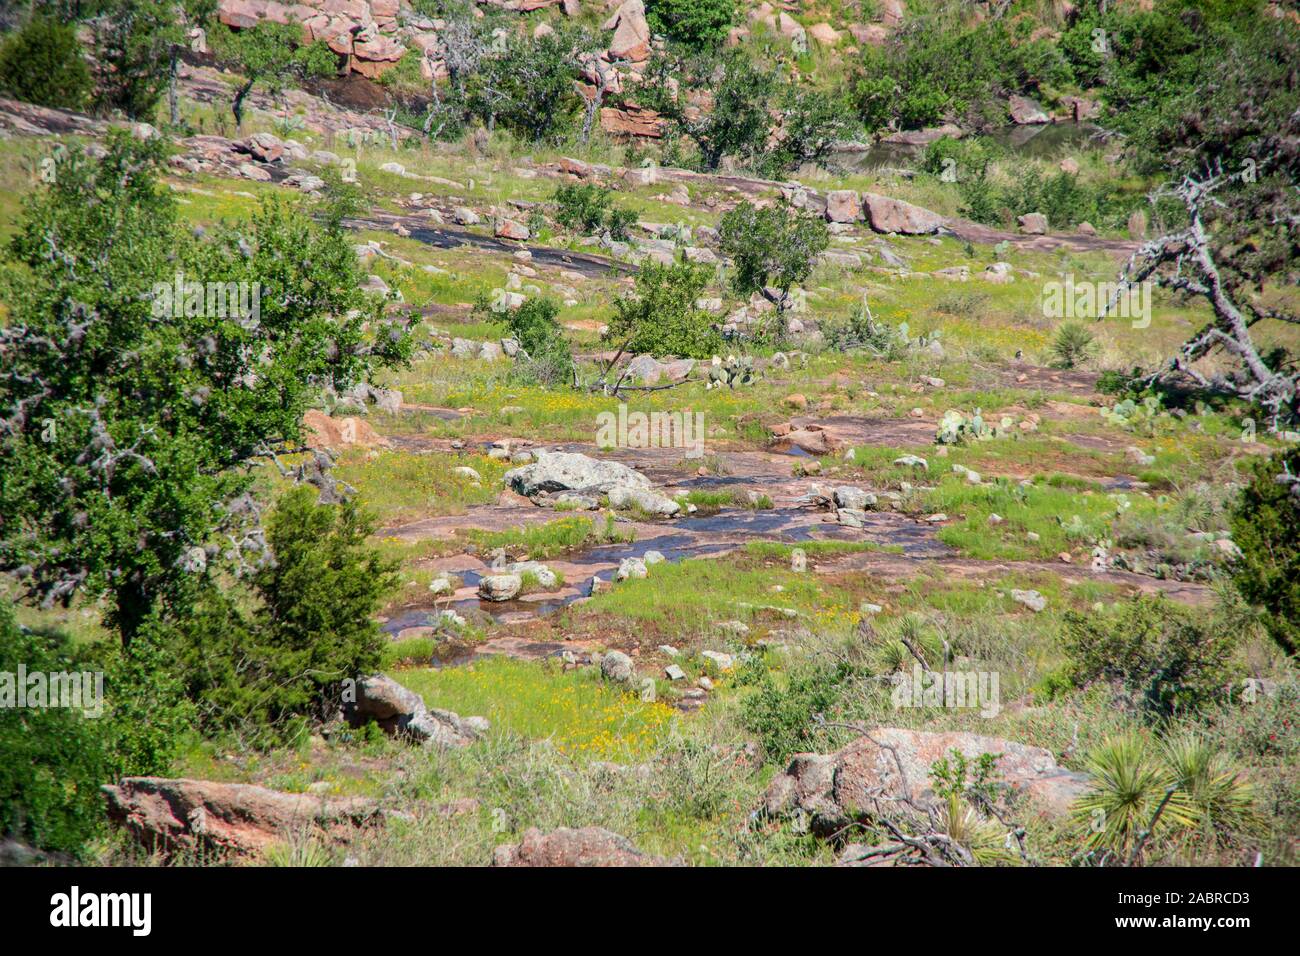 Images out hiking, rocks landscapes, cool Stock Photo